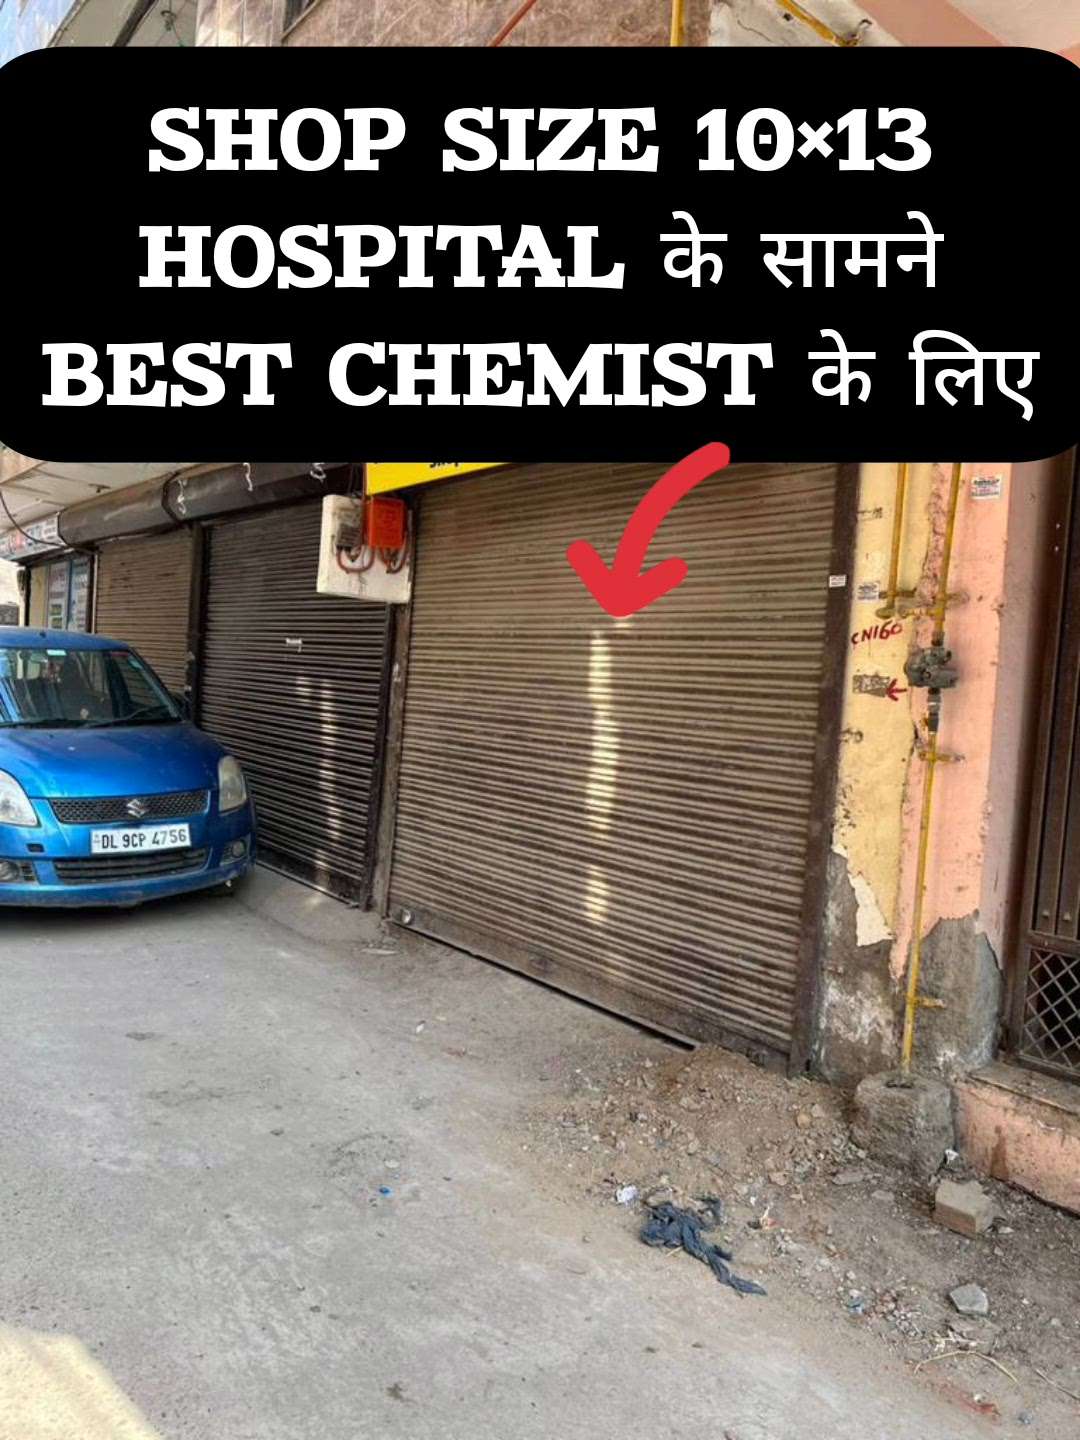 🗣️Commercial Shop available for chemist in front of newly construction going on HOSPITAL IN UTTAM NAGAR WEST DELHI ONLY ONE Shop LEFT IN VERY ECONOMICAL PRICE JUST 25 LAKHS.
SHOP SIZE  10×13
HIEGHT 9.5 FEET
"CALL NOW AND GRAB THE GOLDEN CHANCE"
☎️9718323333 ☎️9250888883